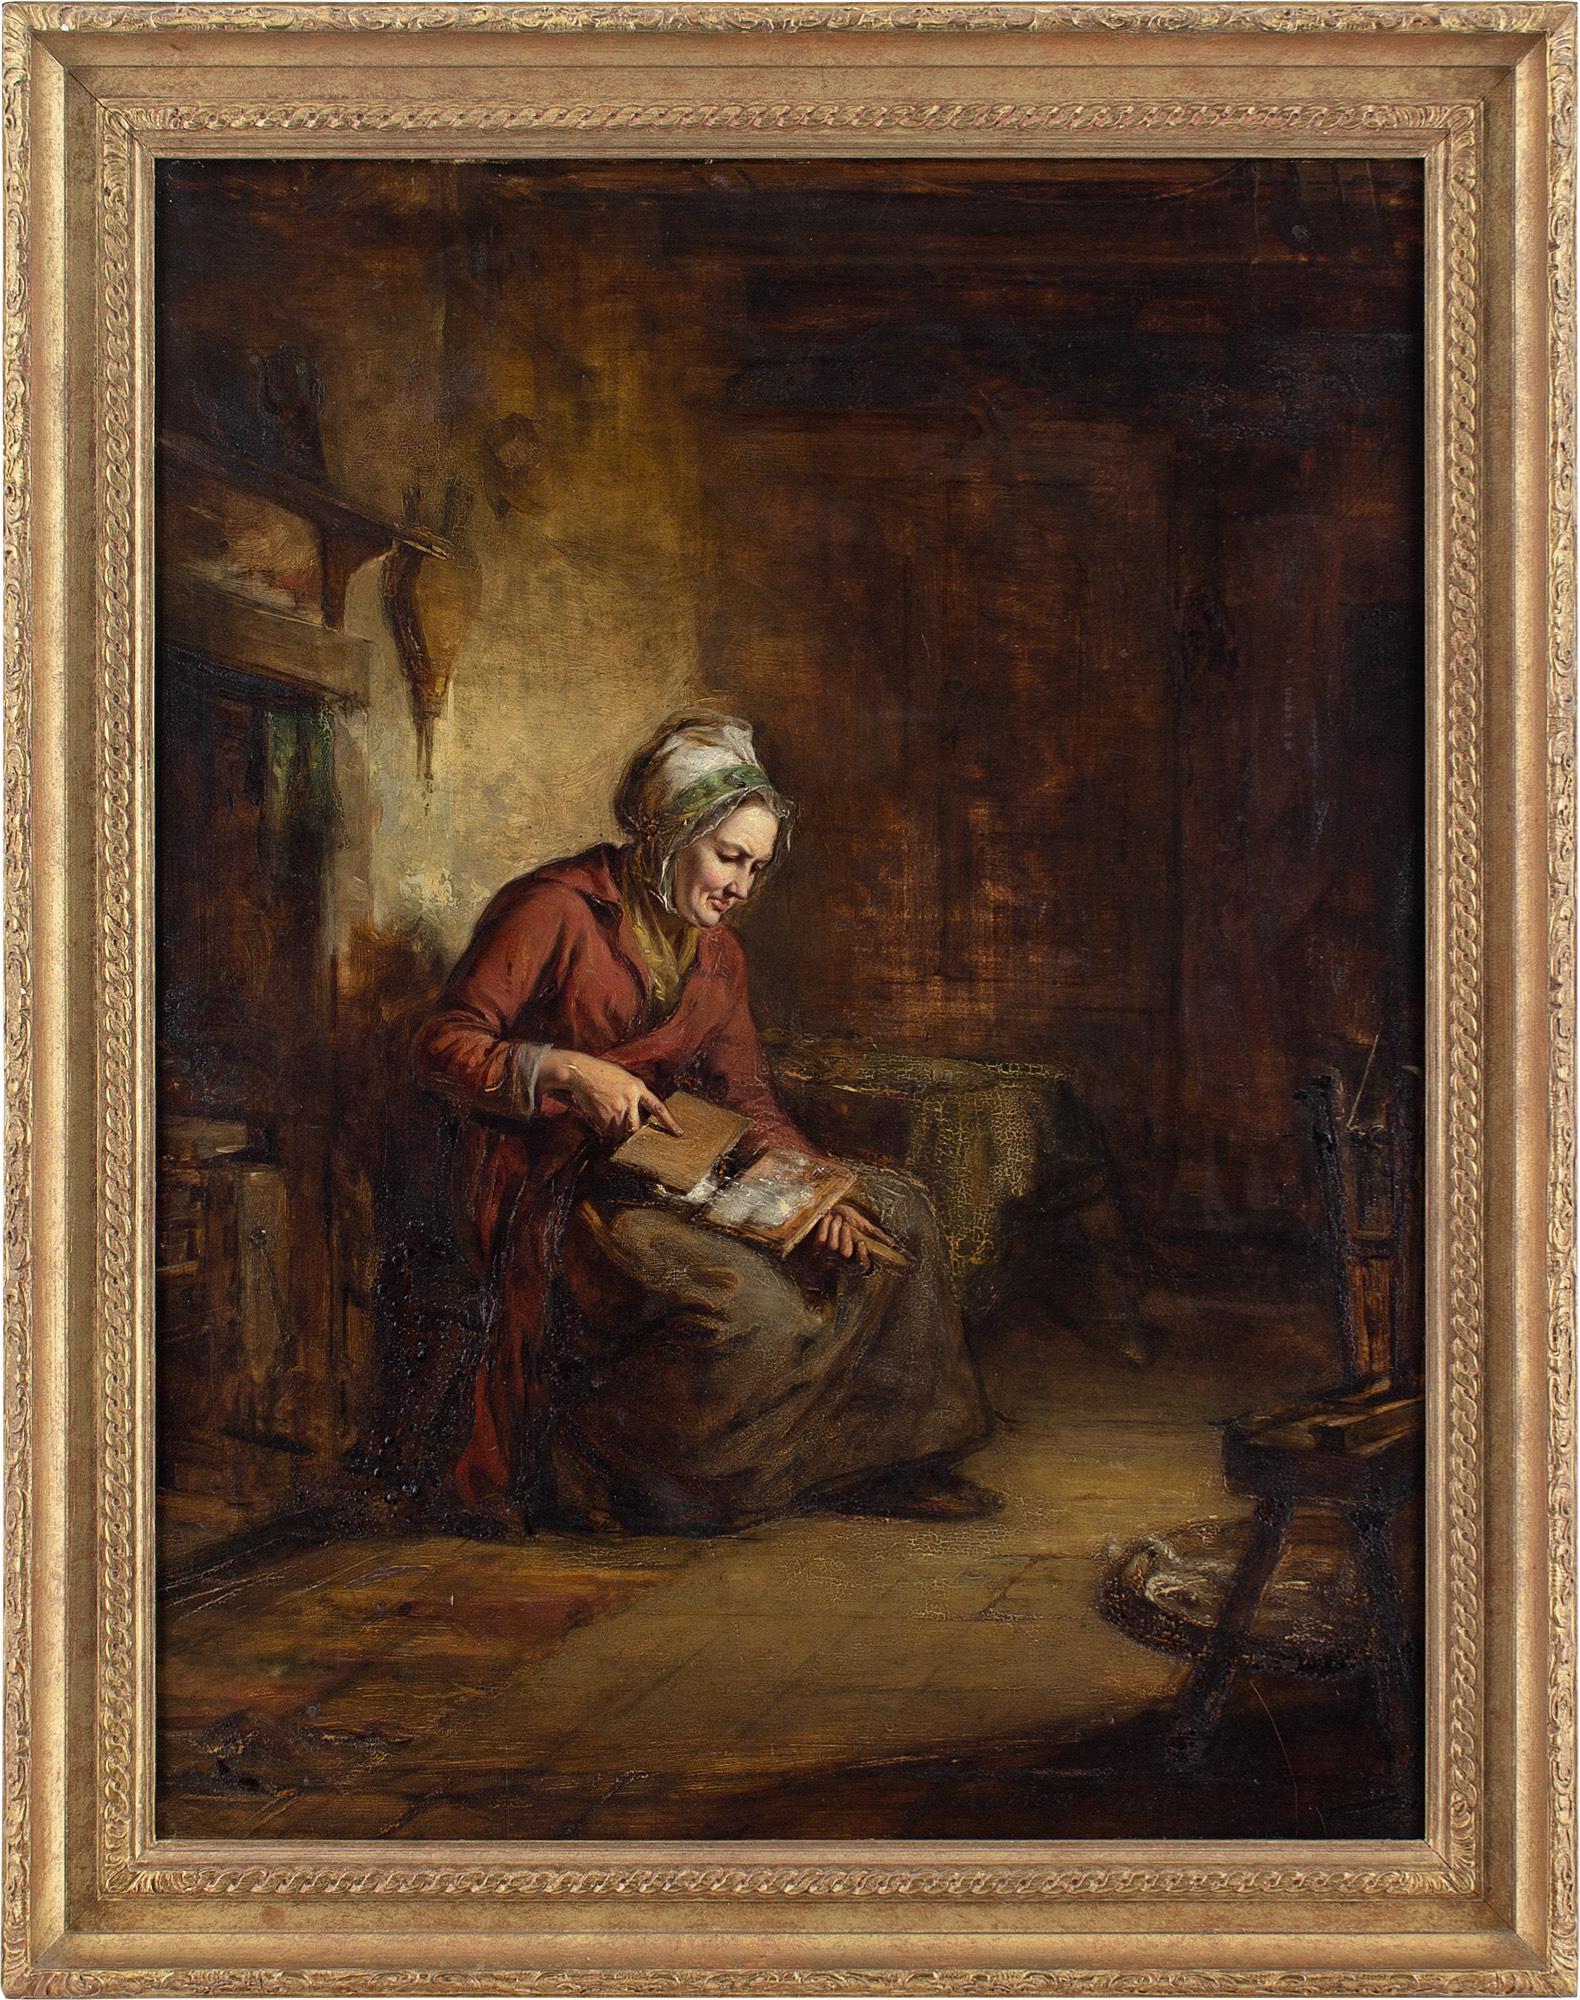 This mid-19th-century oil painting by Scottish artist Robert Thorburn Ross RSA (1816-1876) depicts a seated woman carding wool within a rustic interior.

Robert Thorburn Ross RSA was a distinguished painter of domestic genre scenes. His oeuvre is